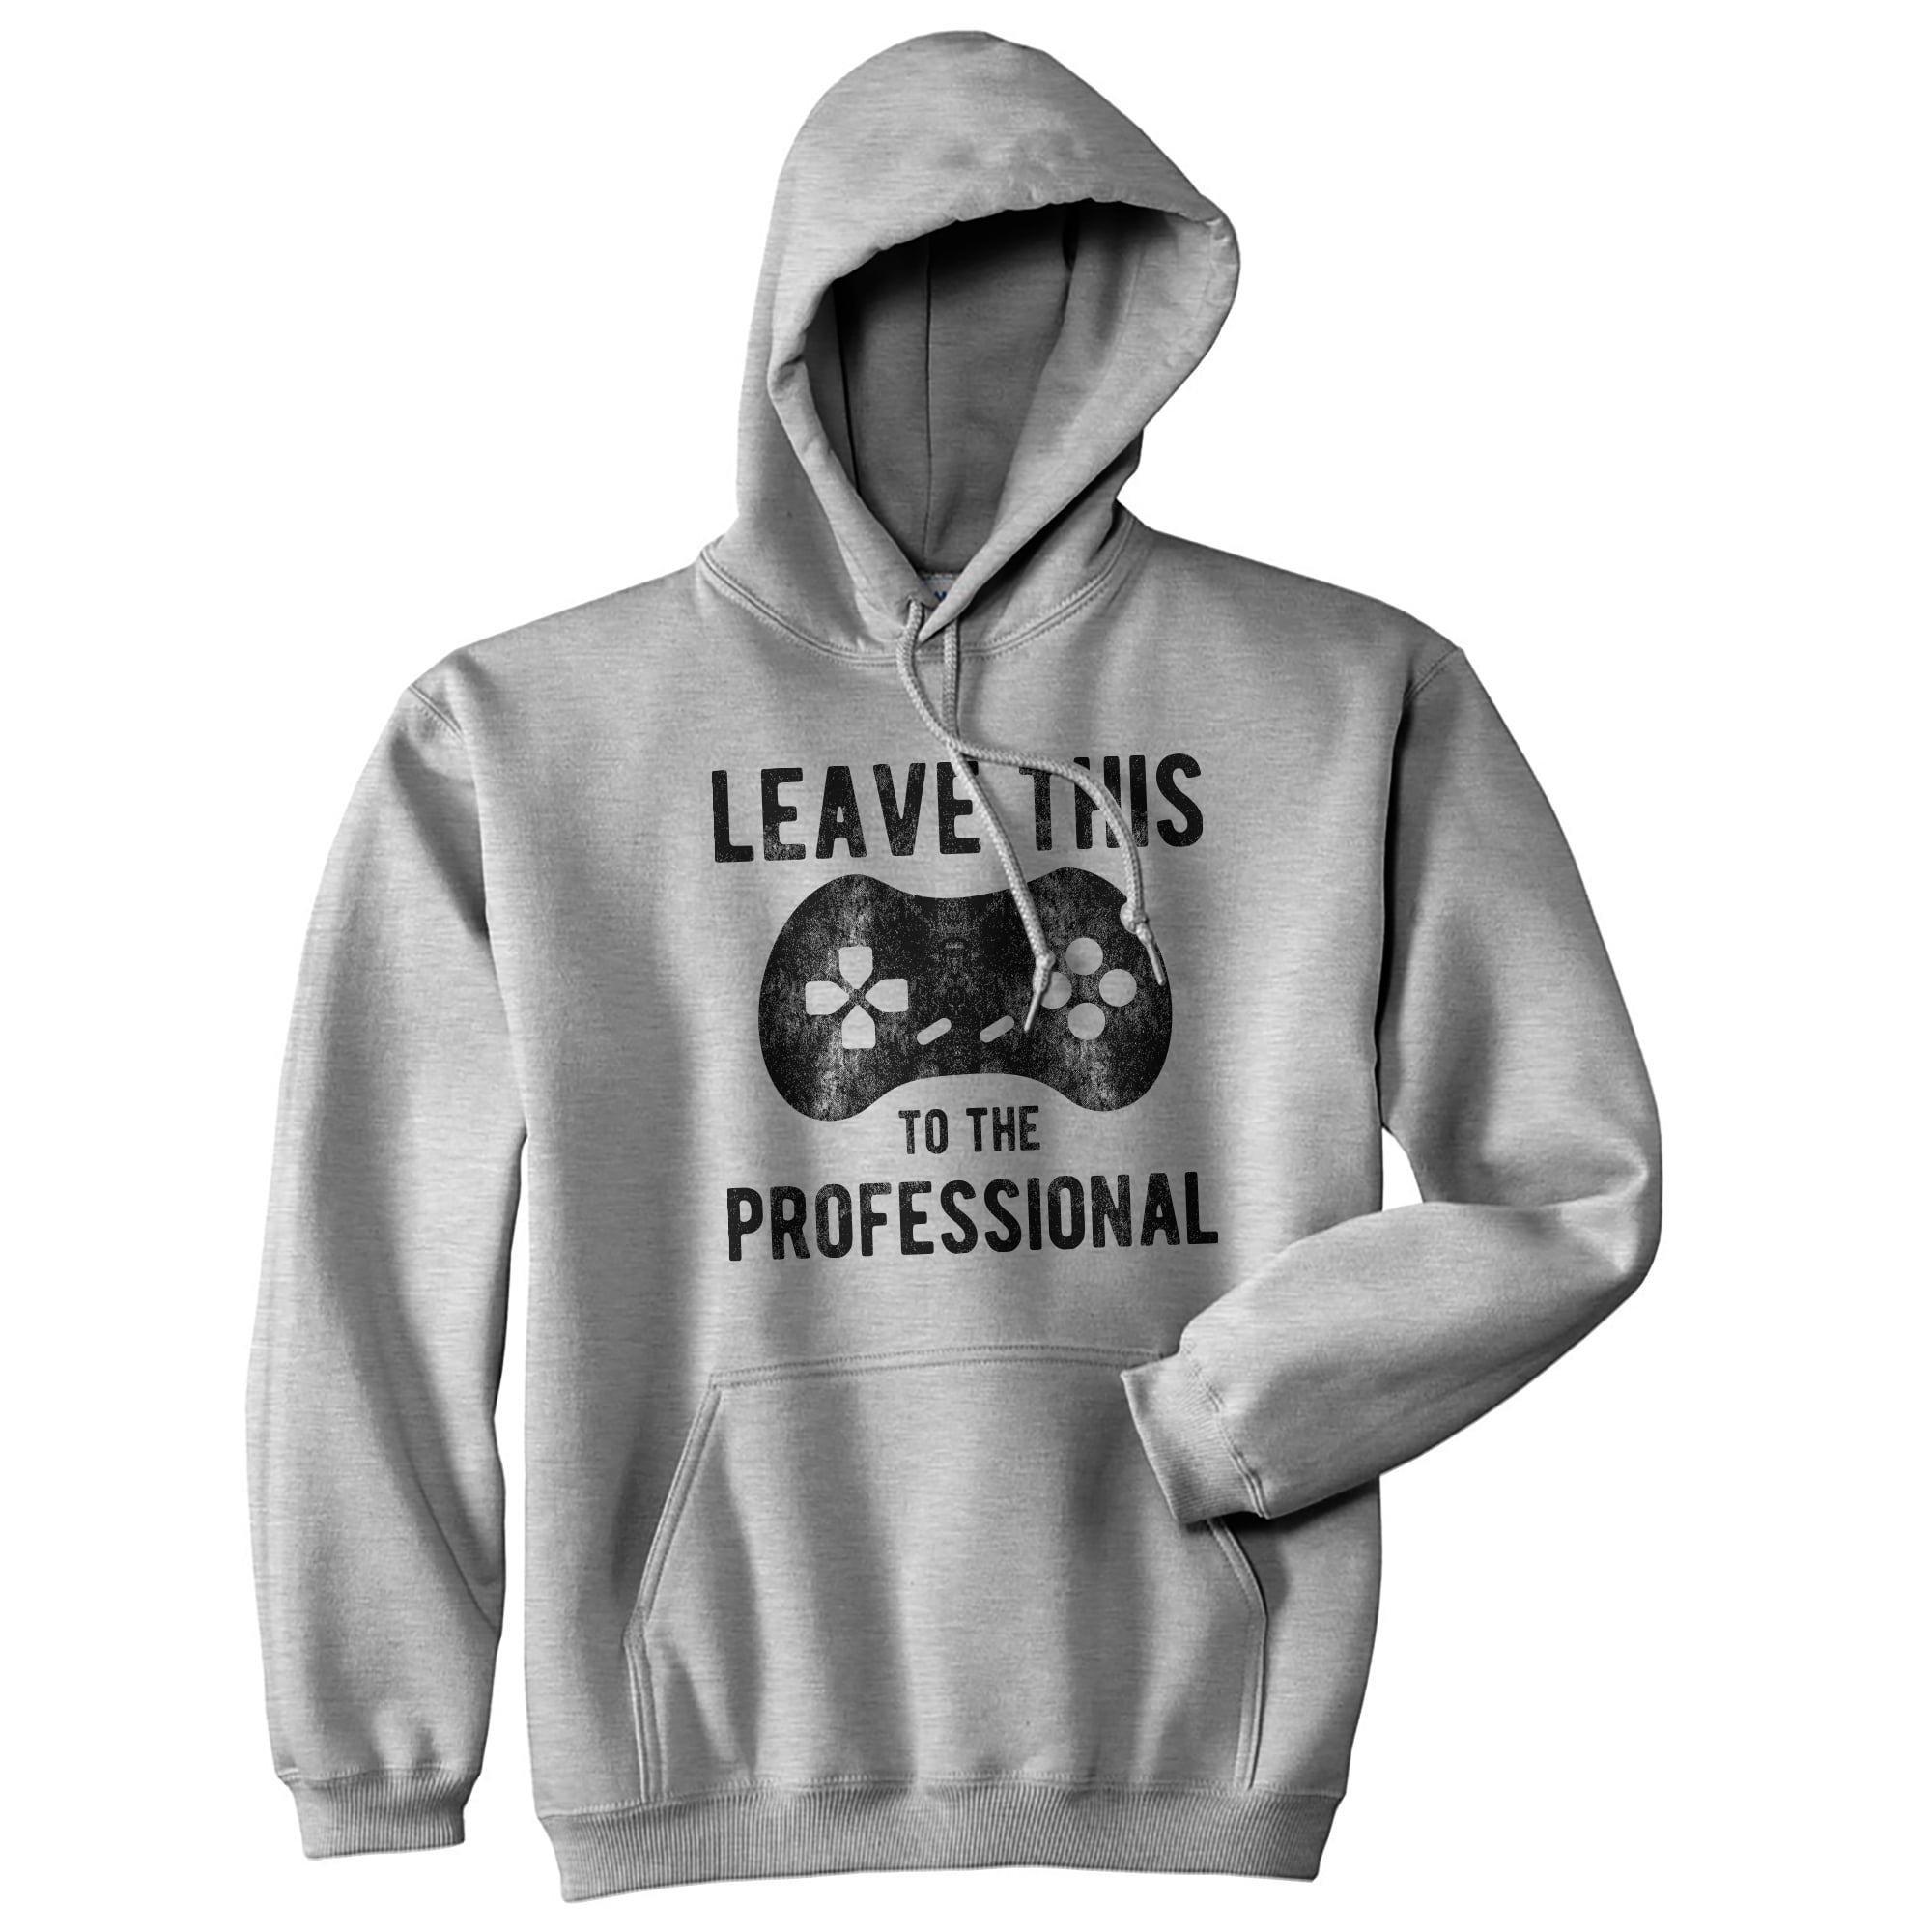 Leave This To The Professional Unisex Hoodie Funny Video Games Novelty  Gamer Console Sweatshirt (Heather Grey) - L 